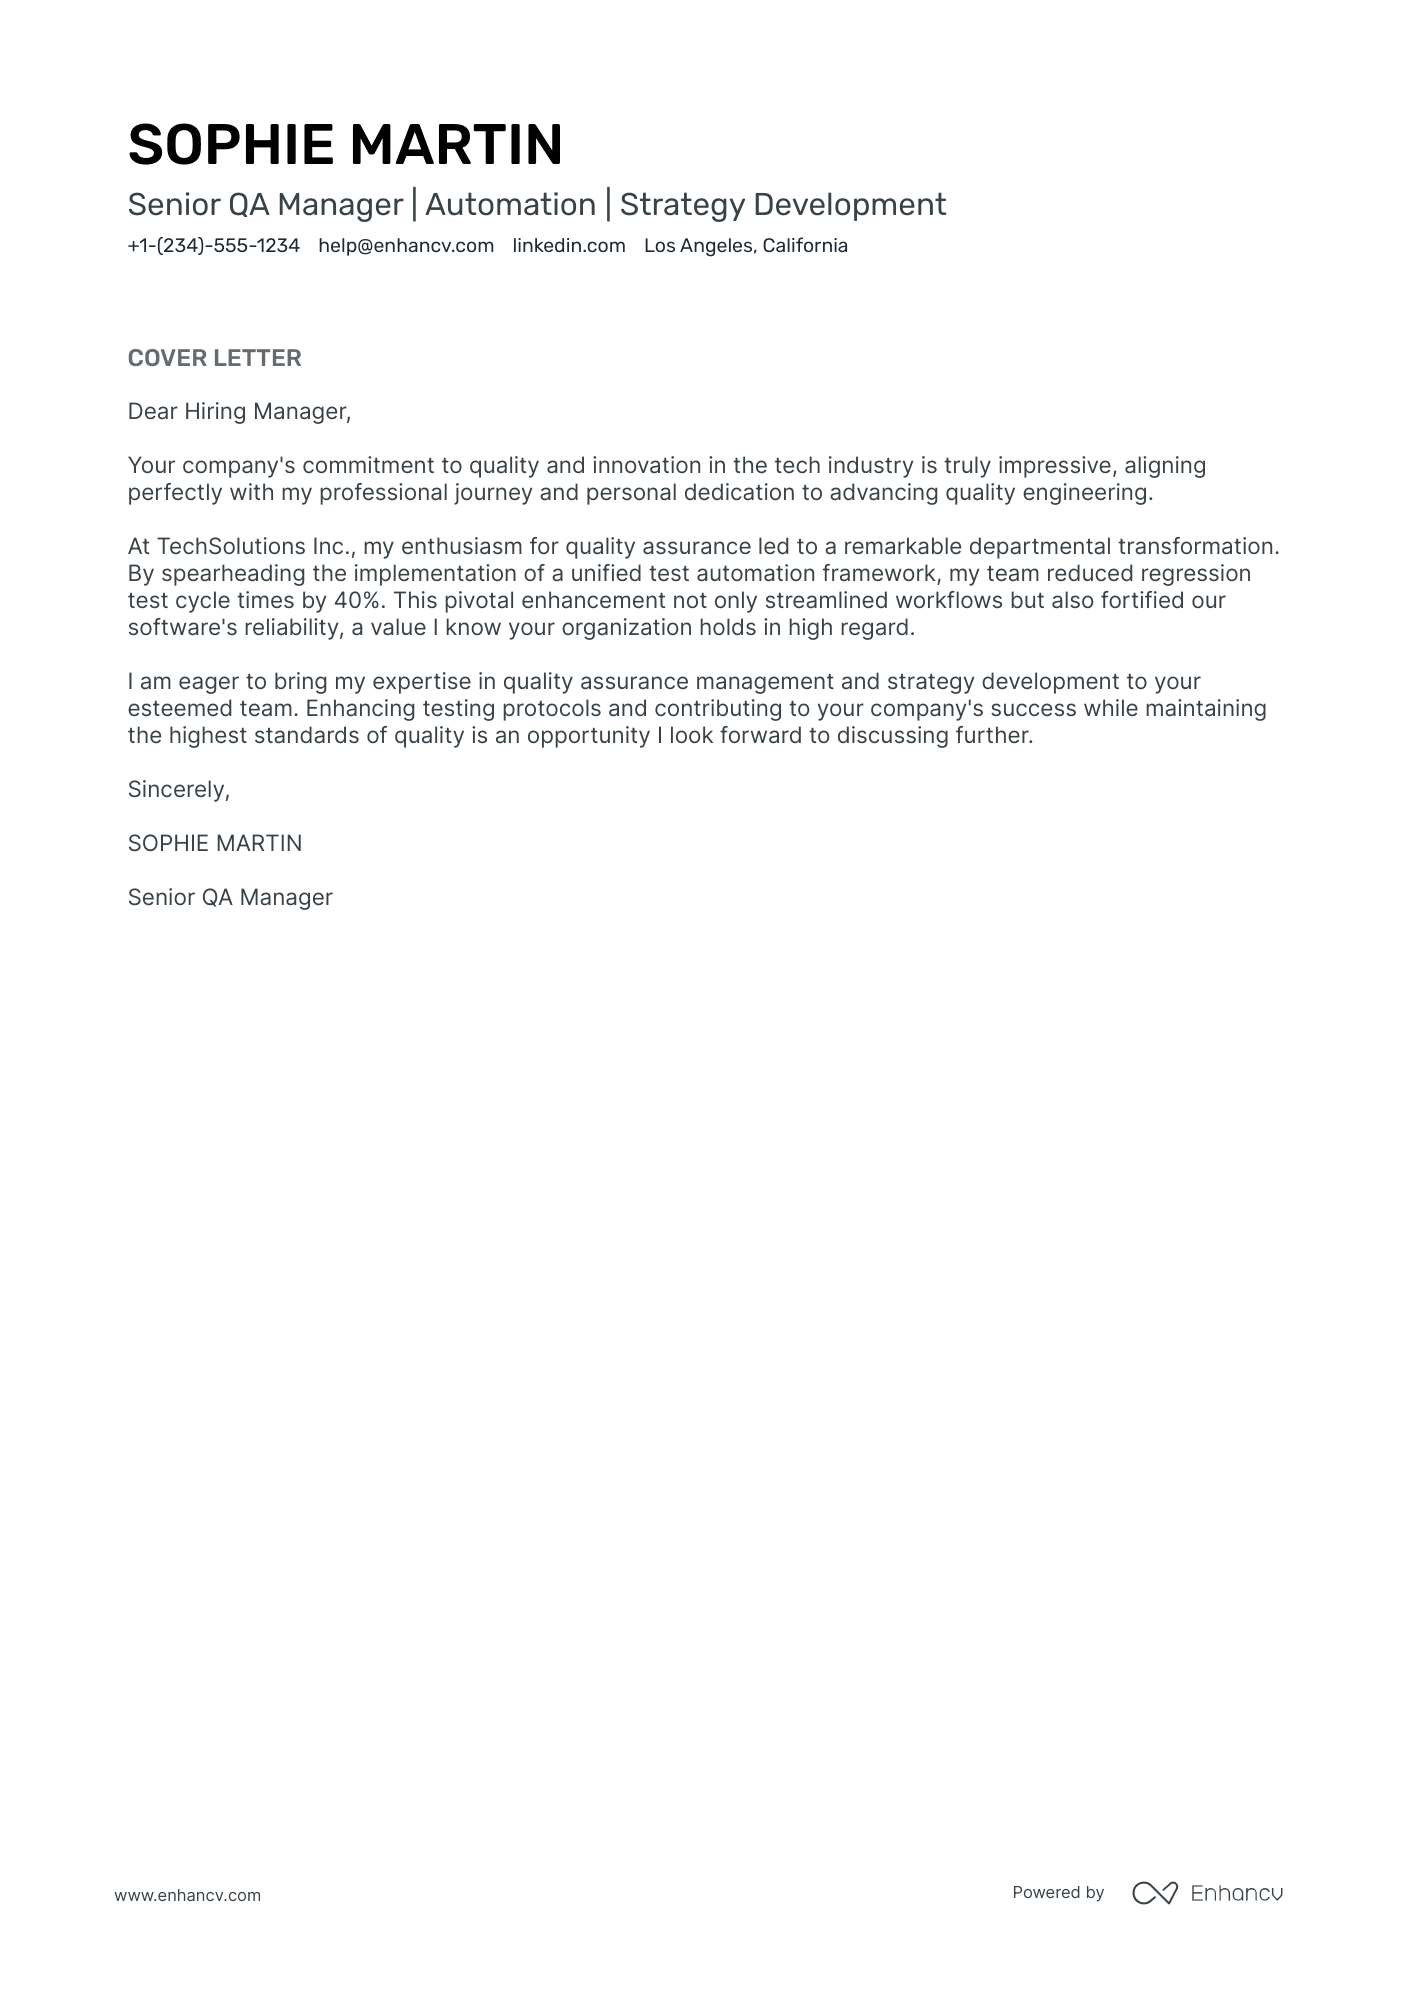 Software QA Manager cover letter